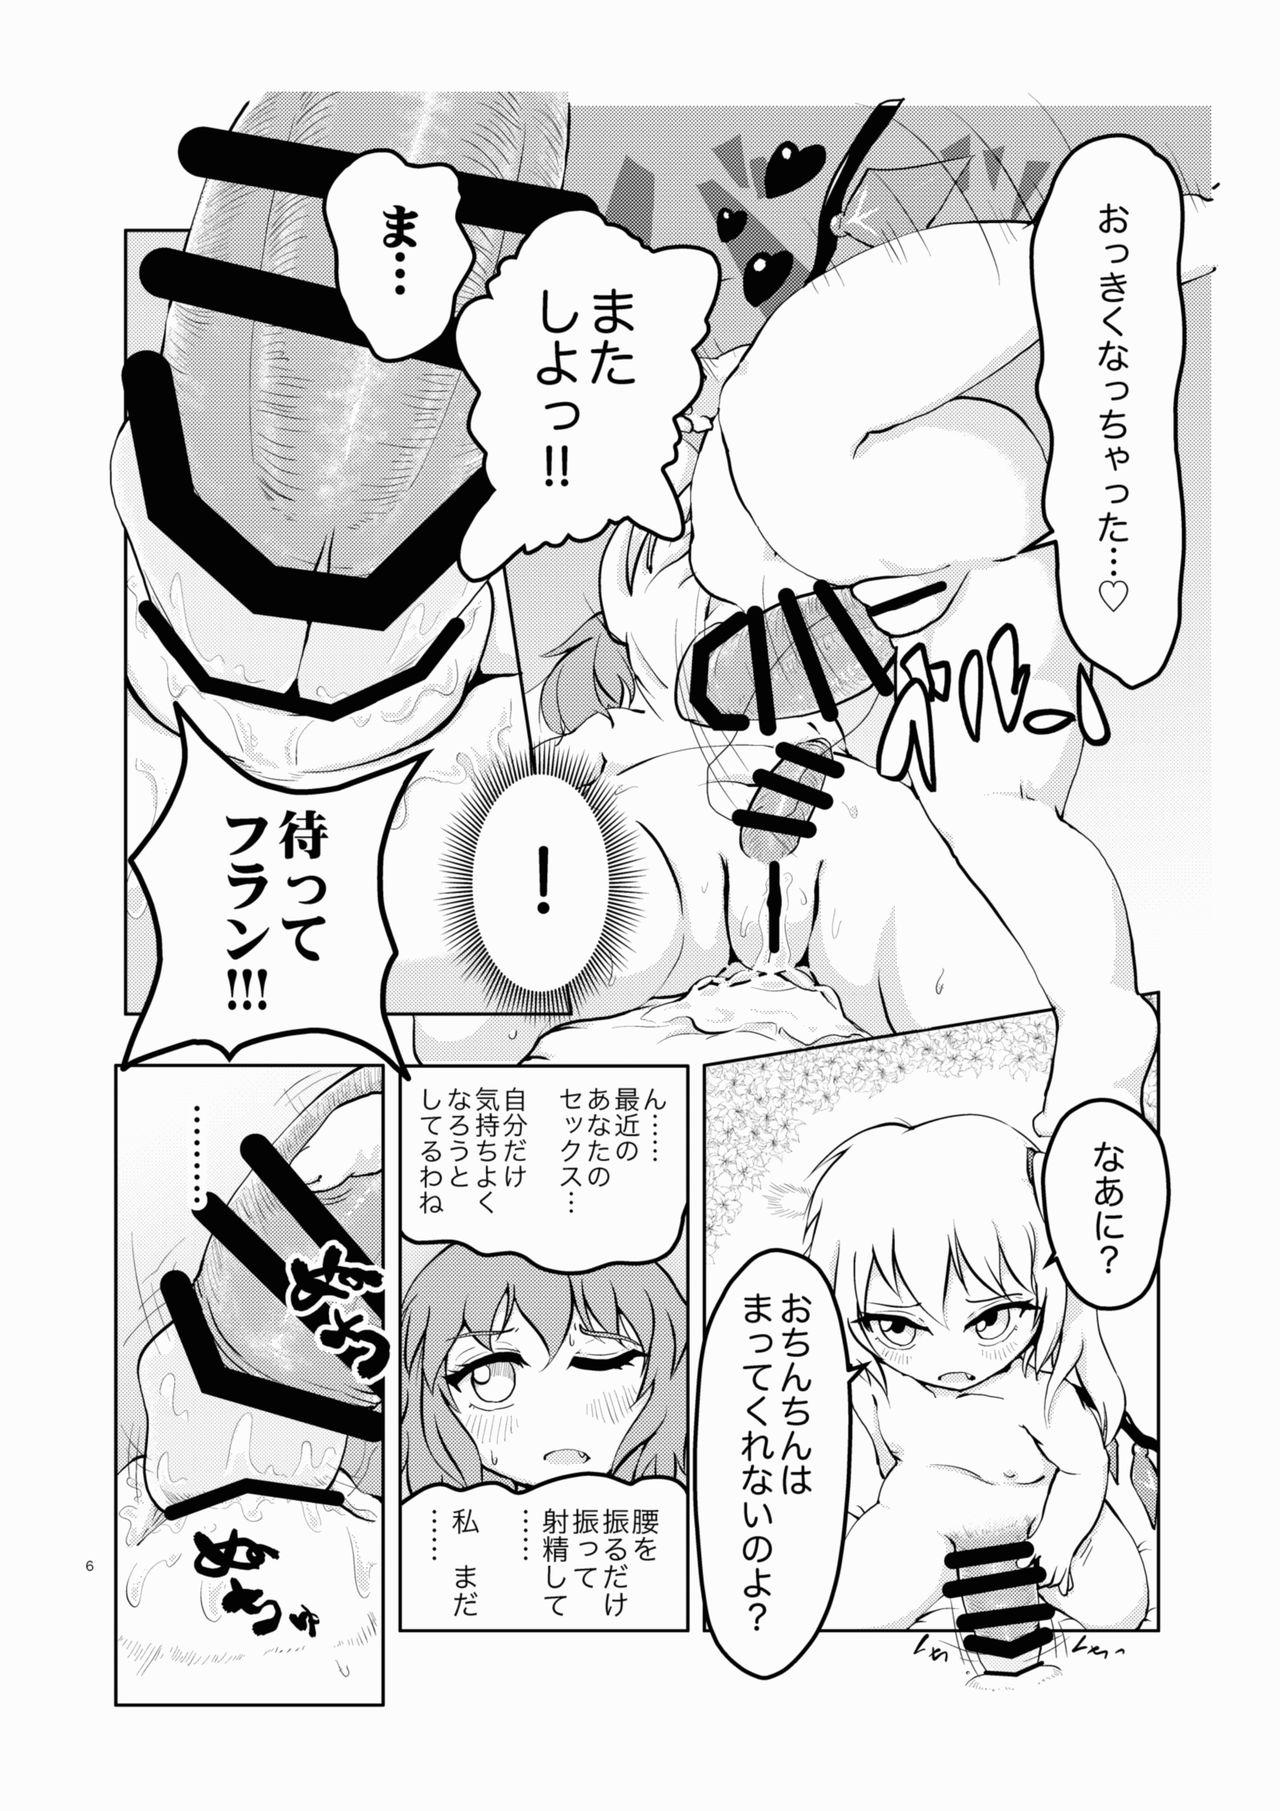 Chileno Scarlet Conflict 1 - Touhou project Bedroom - Page 6